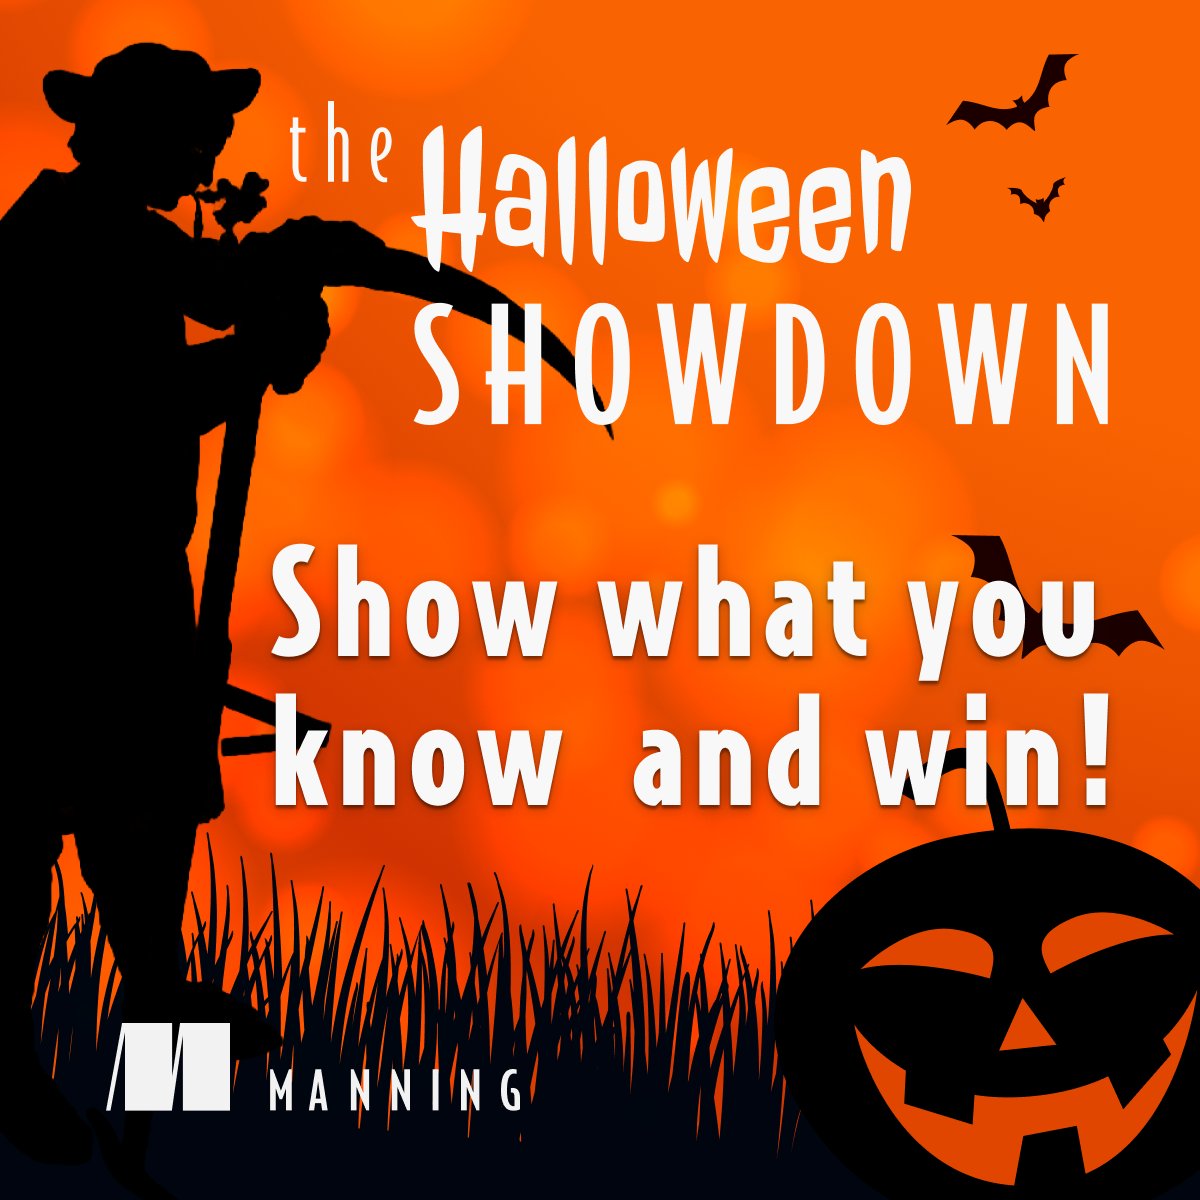 📣 The Halloween Showdown, Oct 16 - Oct 31 📣 Enter and win daily prizes and 1 year of Manning online! mng.bz/7vDy #GameProgramming #ManningBooks #LearnwithManning